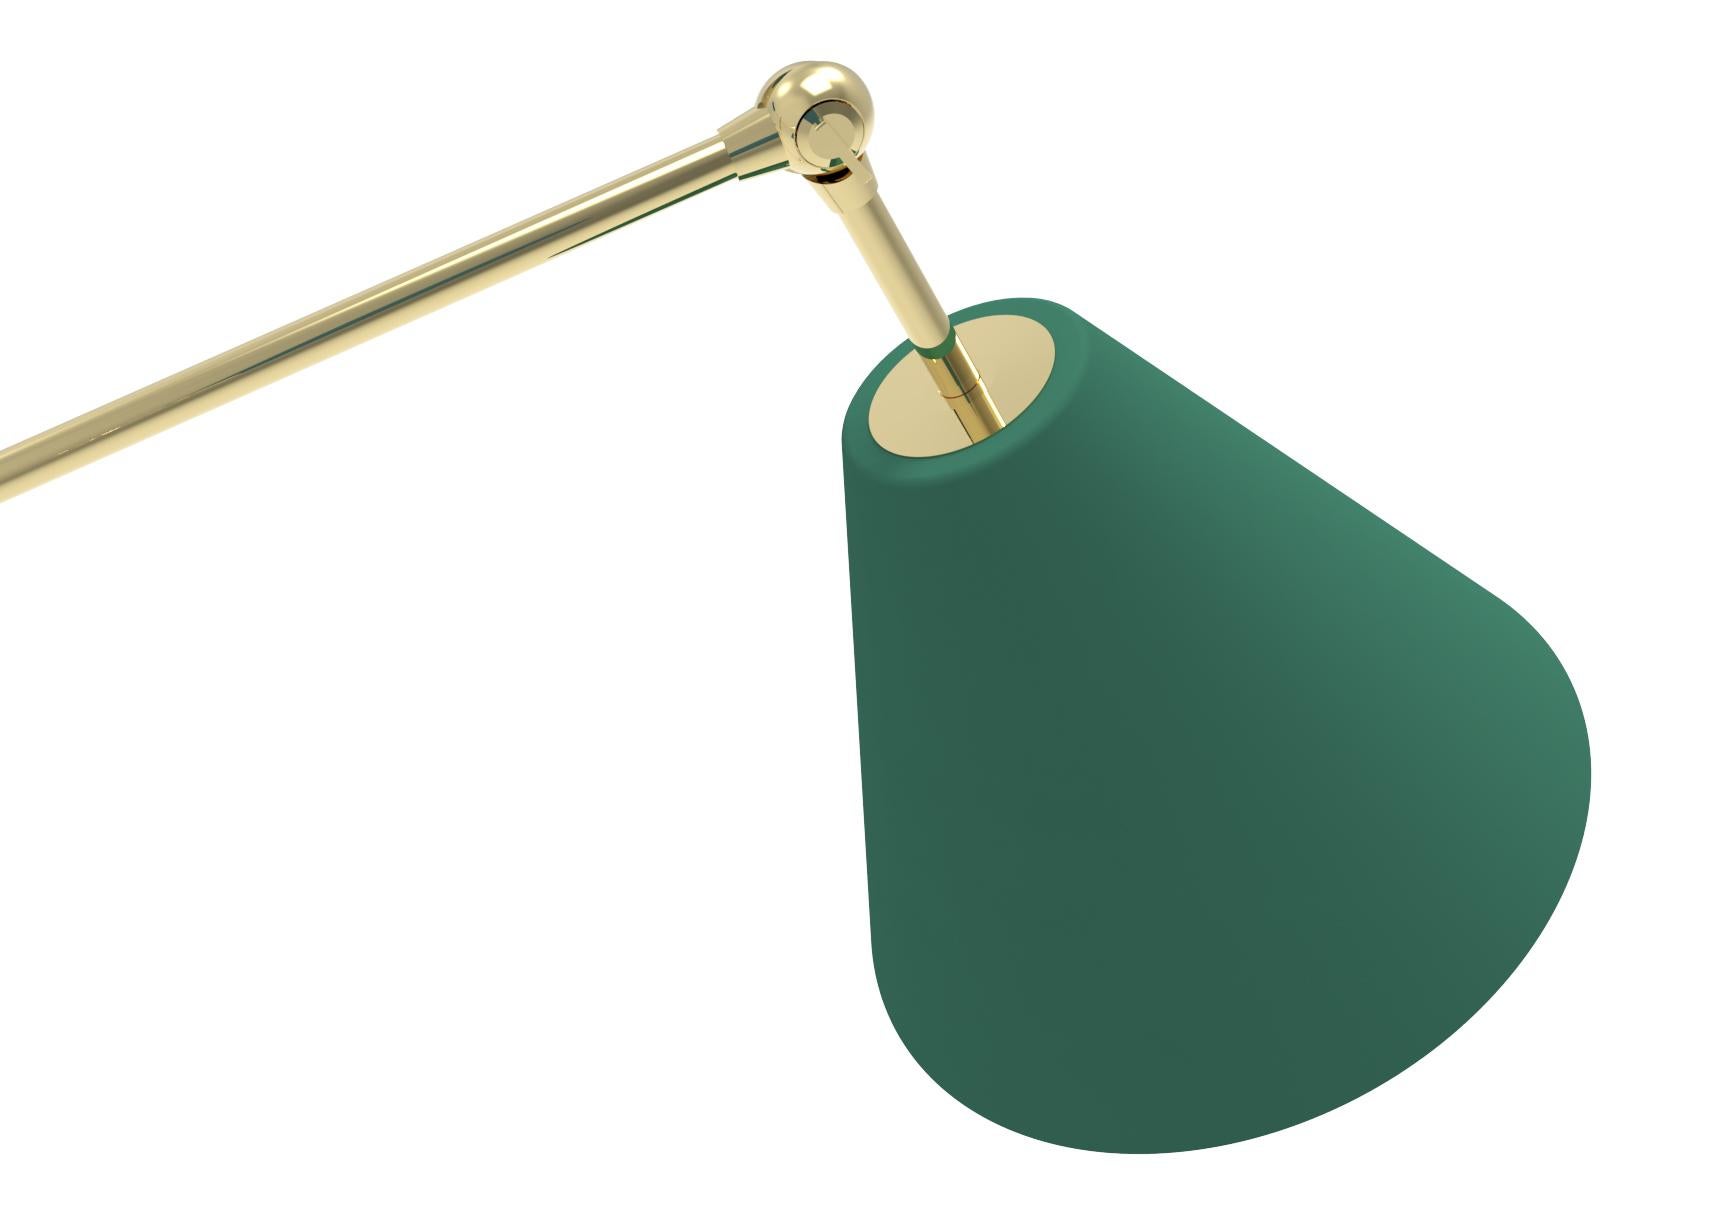 Contemporary 21st Century Triennale pendant lamp, brass&brown-green-white, Lelii, 2019, Italy For Sale